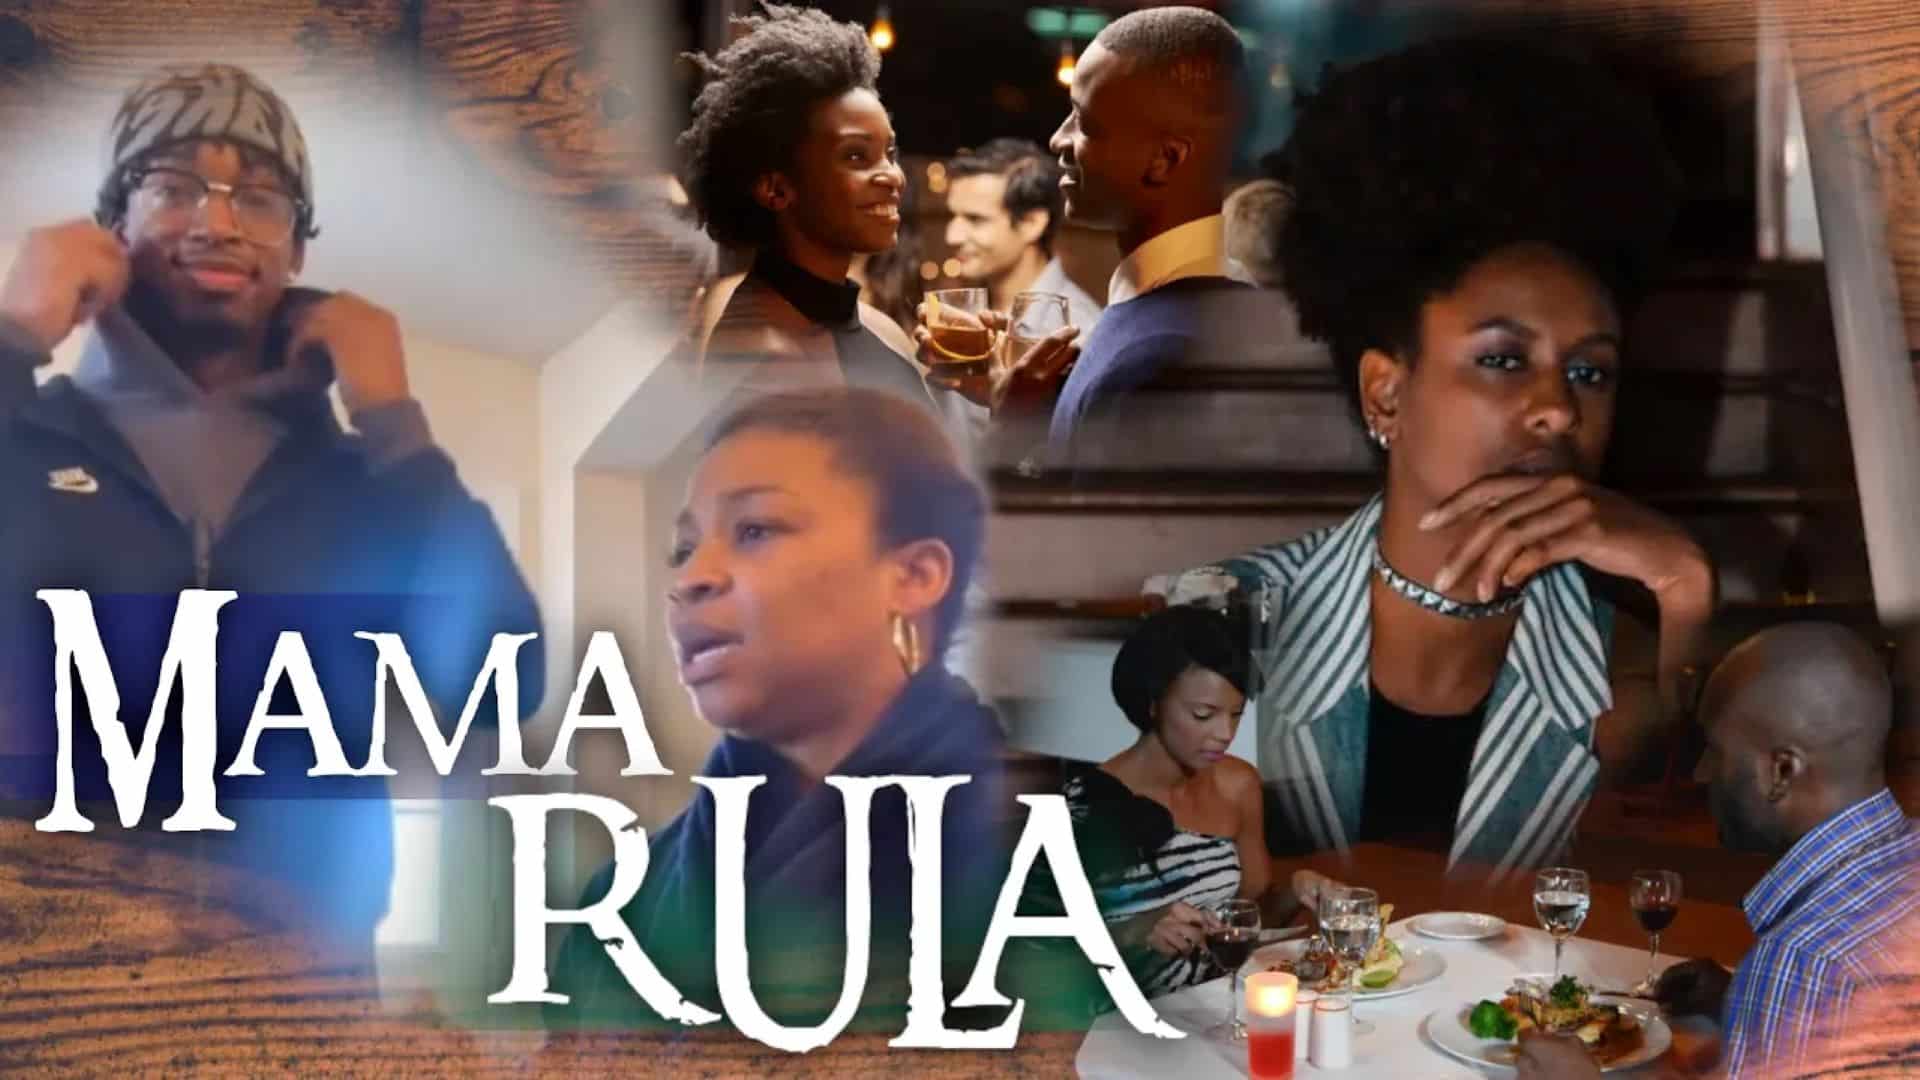 Mama Rula Cooks Entitled Modern Women For Wanting Expensive Dinner Dates